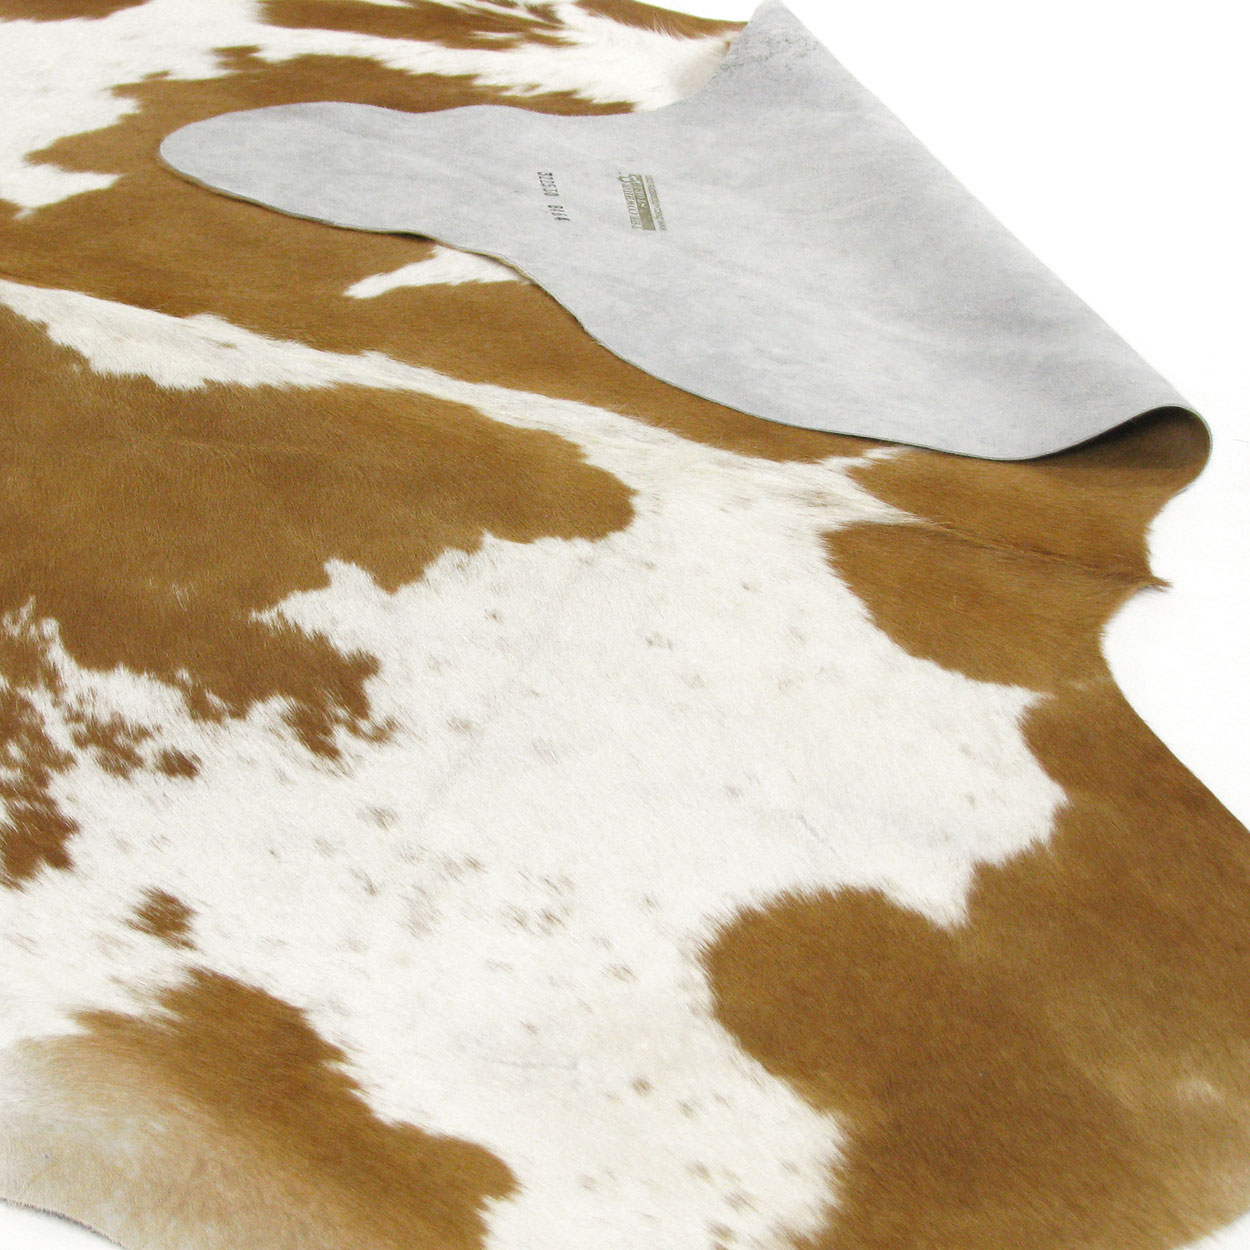 322530 - Premium Grade A Natural Brown and White Cowhide